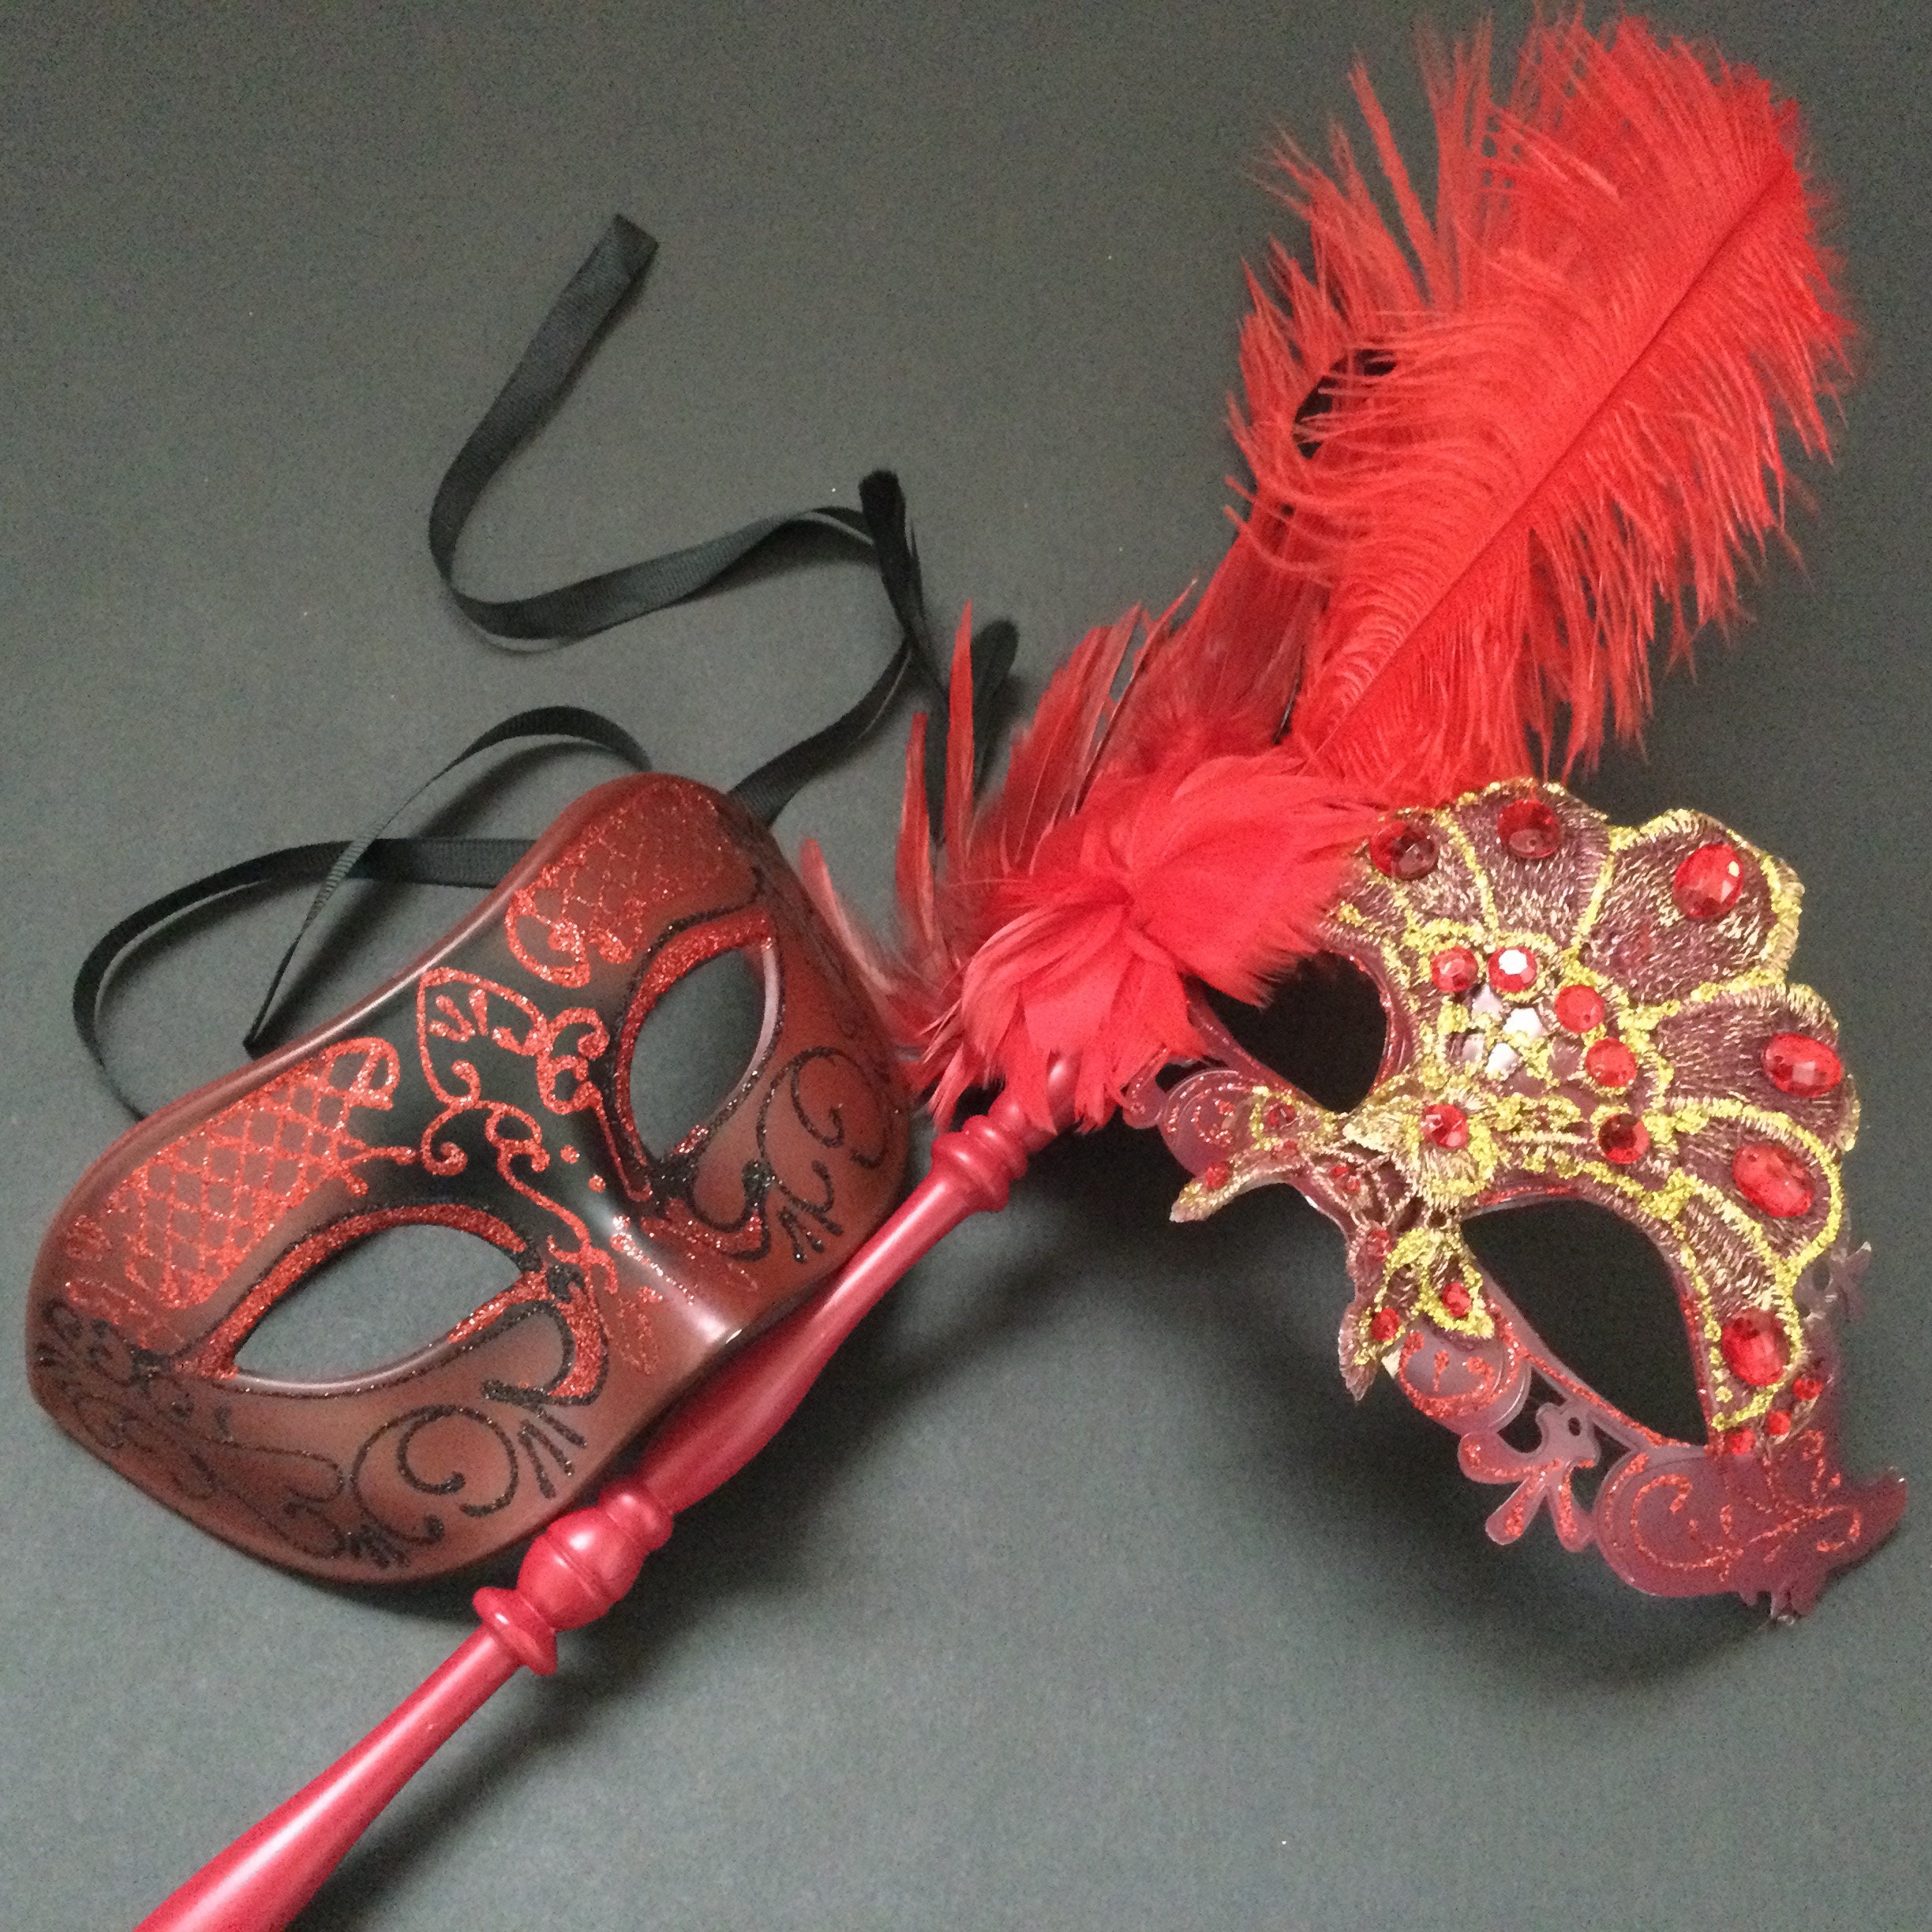 Sequined Red Masquerade Mask With Rhinestones and Embroidery Embellished  Venetian Style Red Masquerade Ball Mask 